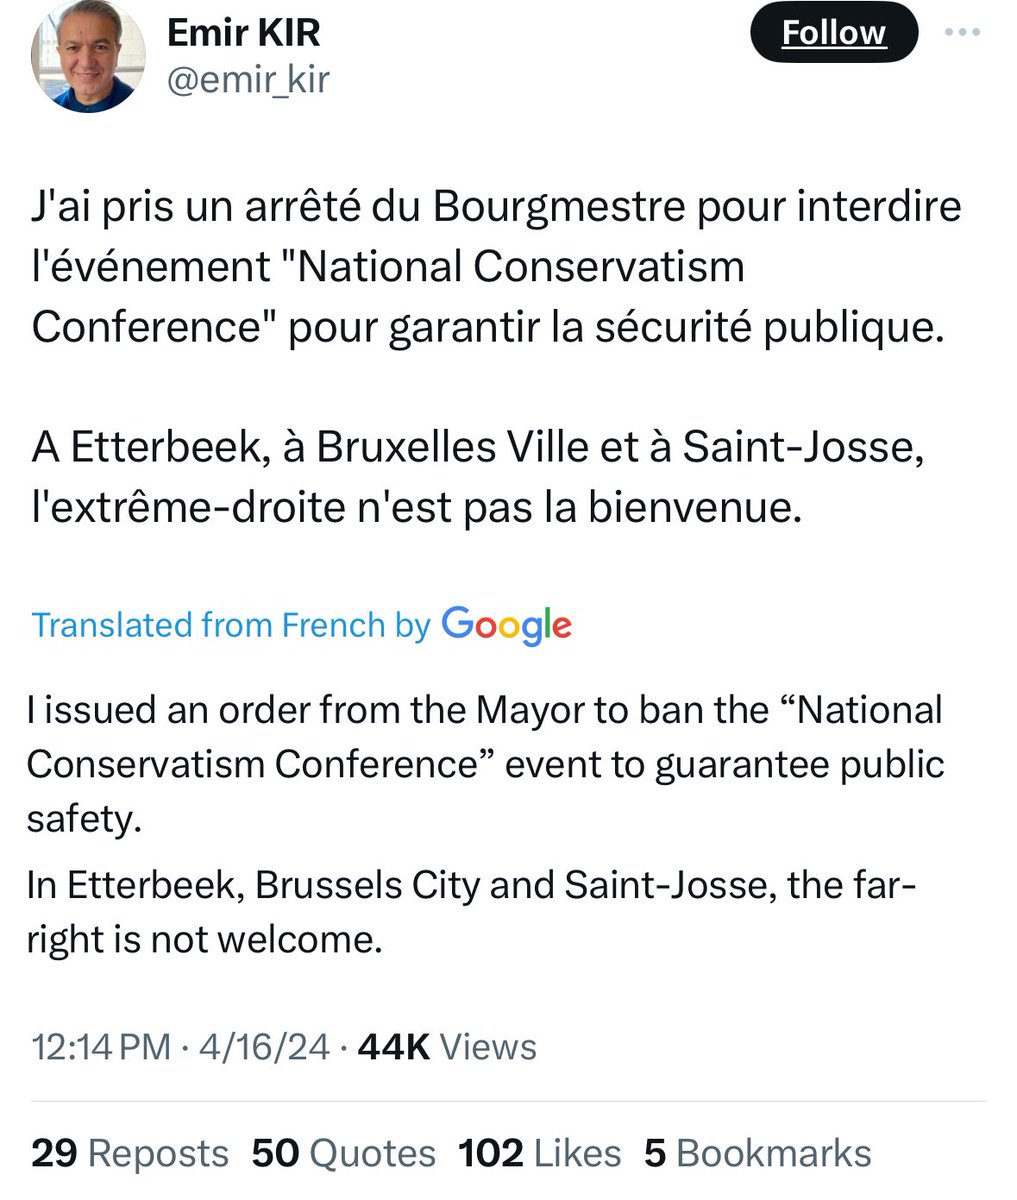 This is the mayor in a supposedly democratic country in the West. Banning conservative speech to guarantee “public safety.” Western institutions are bearing their anti-democratic, authoritarian fruit.